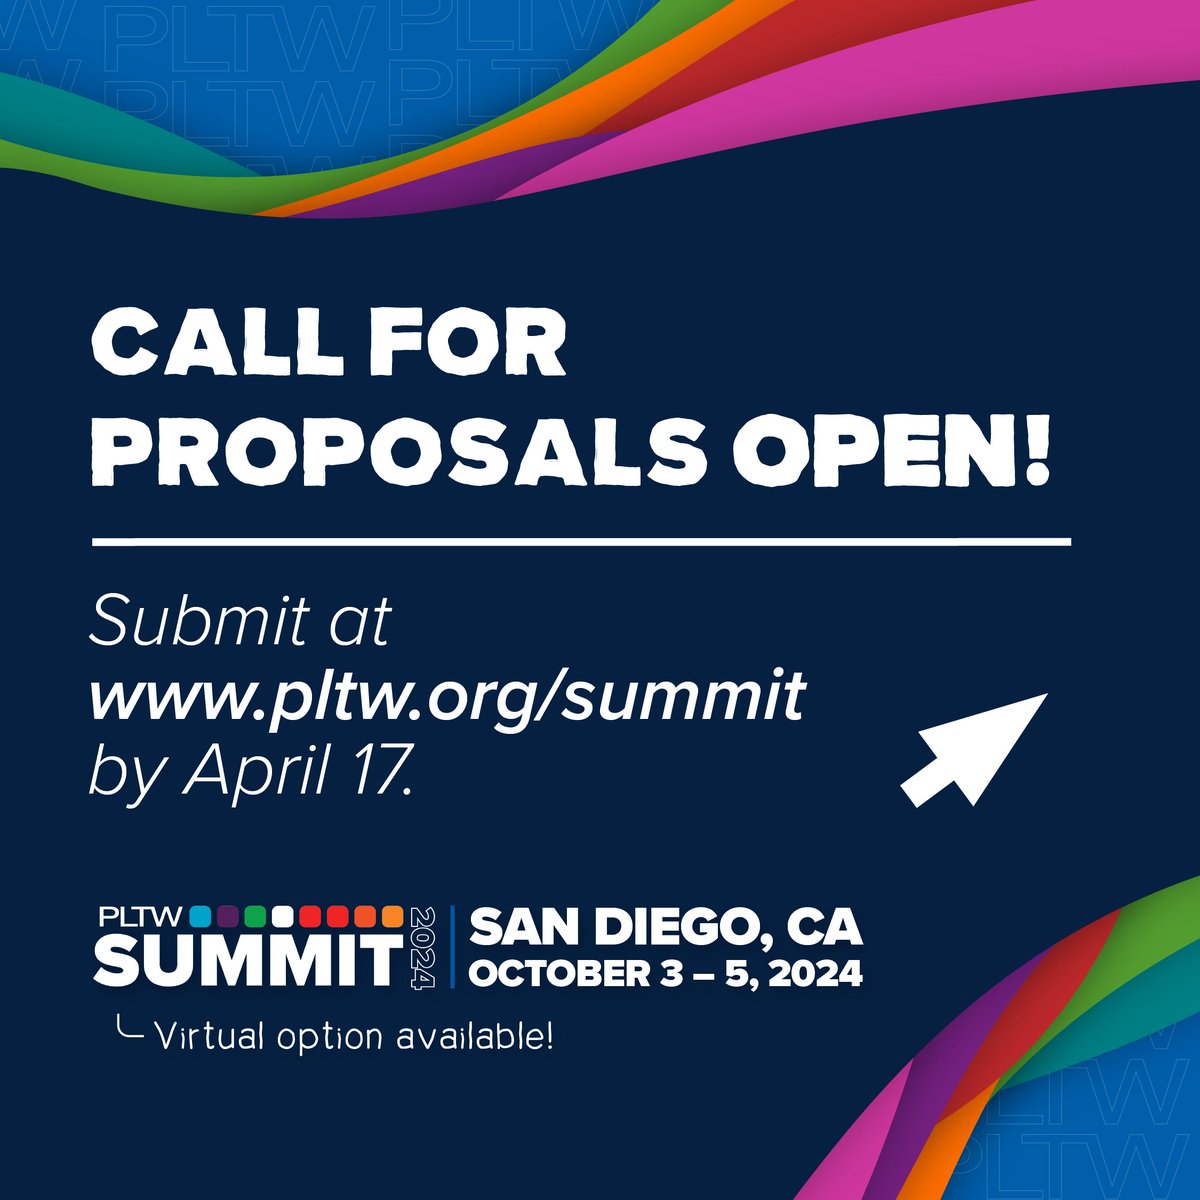 📢 Attention STEM educators and advocates! We're excited to announce the Call for Proposals for #PLTWSummit 2024 opens today. Showcase your expertise and contribute to our dynamic community. Learn more and submit your proposal by April 17: bit.ly/3x1l4zo #STEMeducation